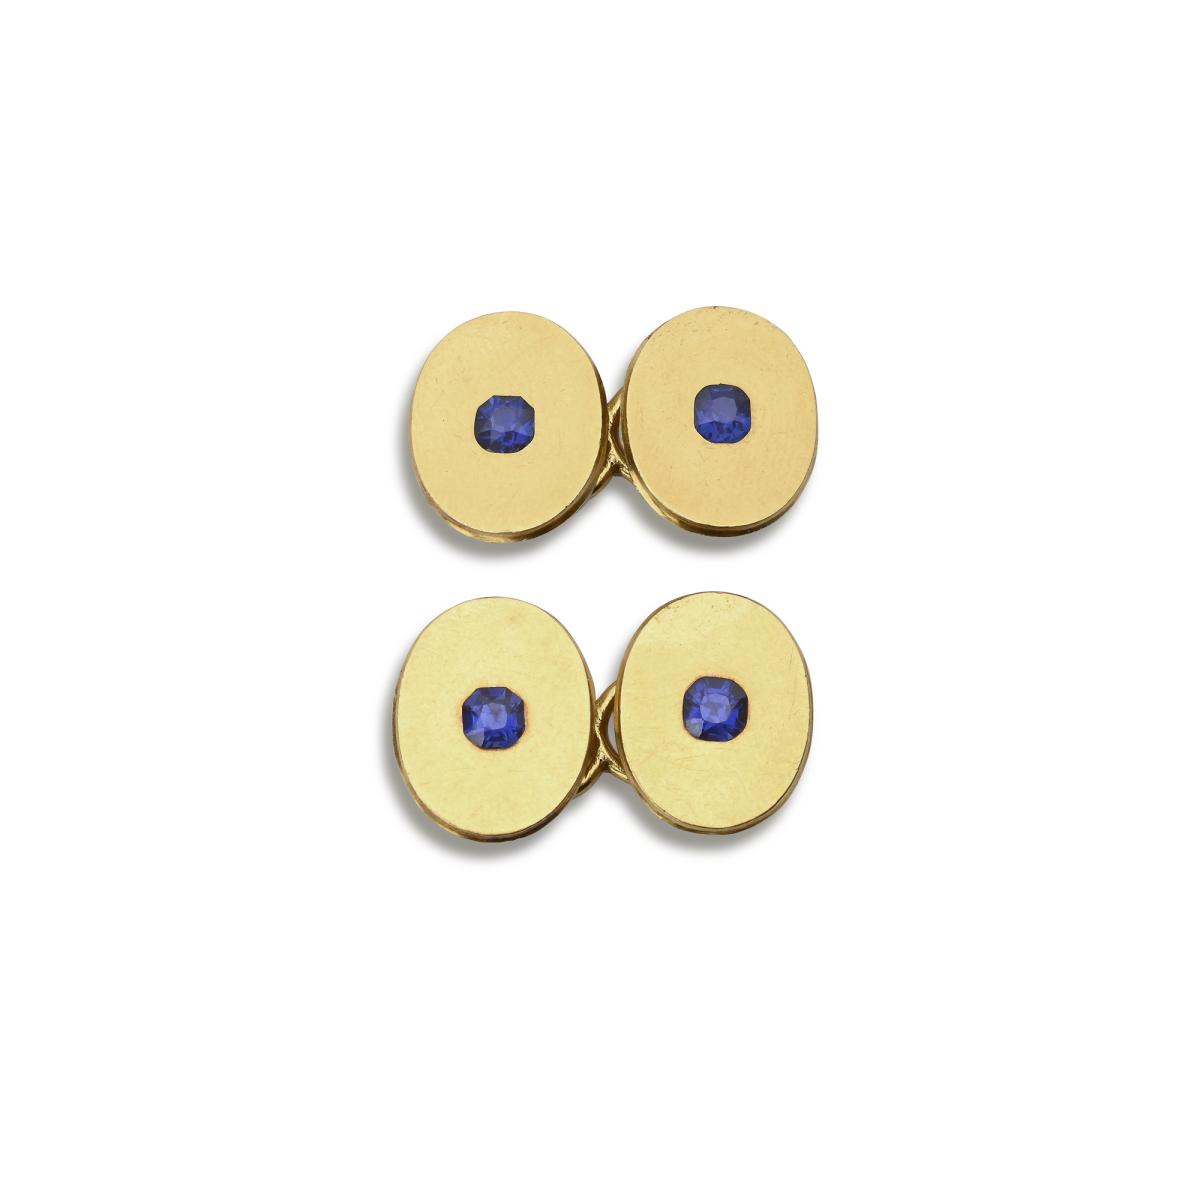 Pair of Sapphire and Gold Cufflinks